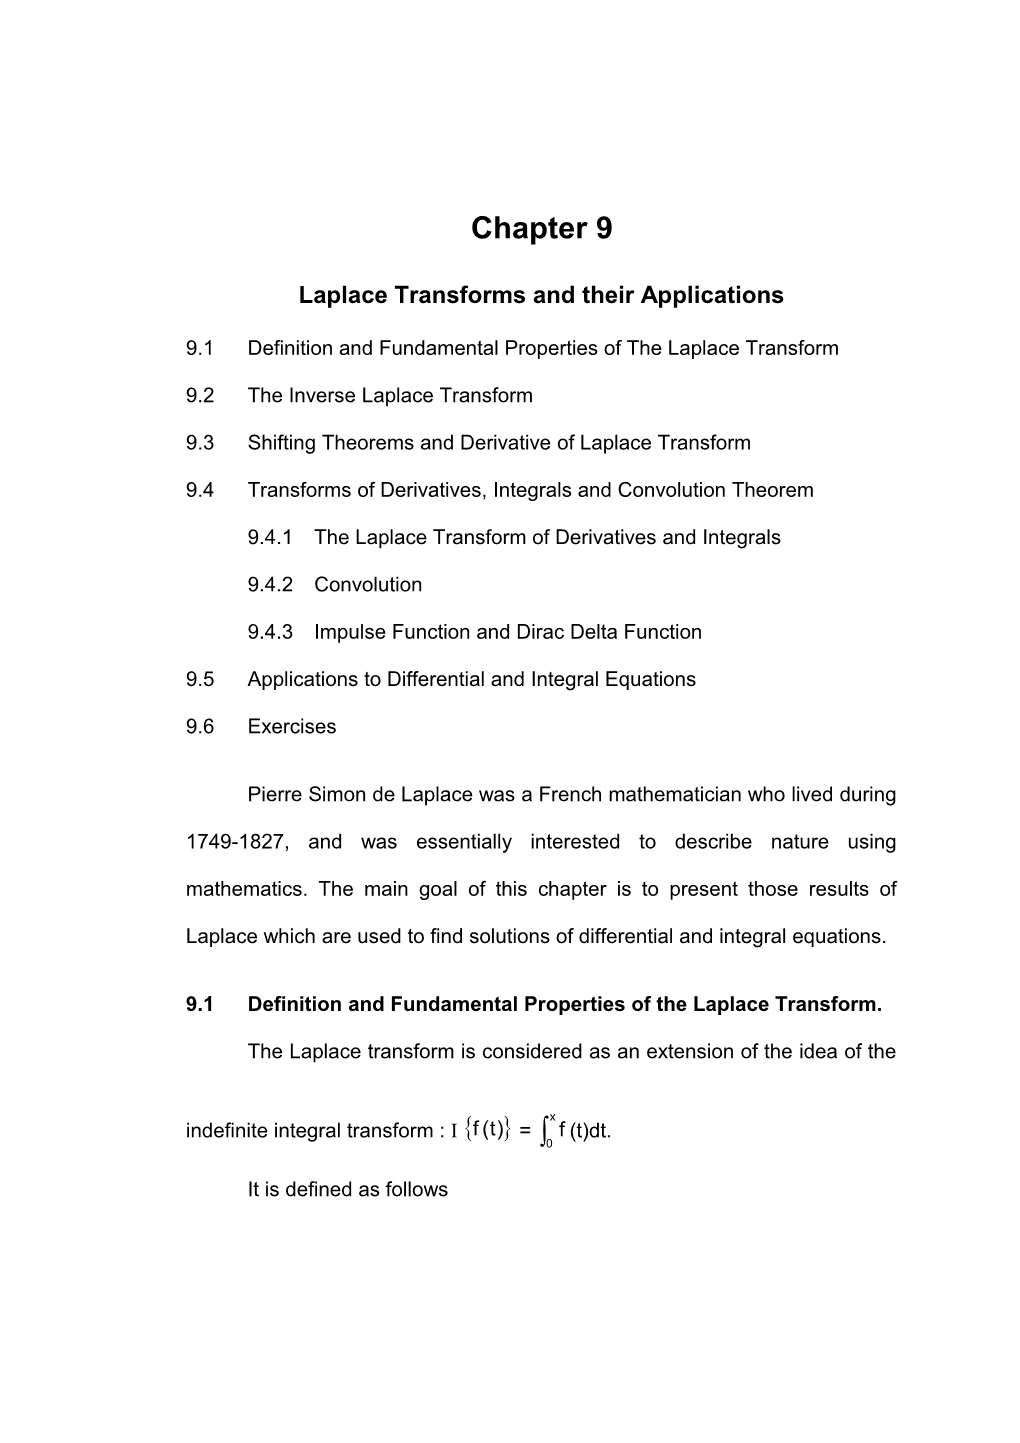 Laplace Transforms and Their Applications